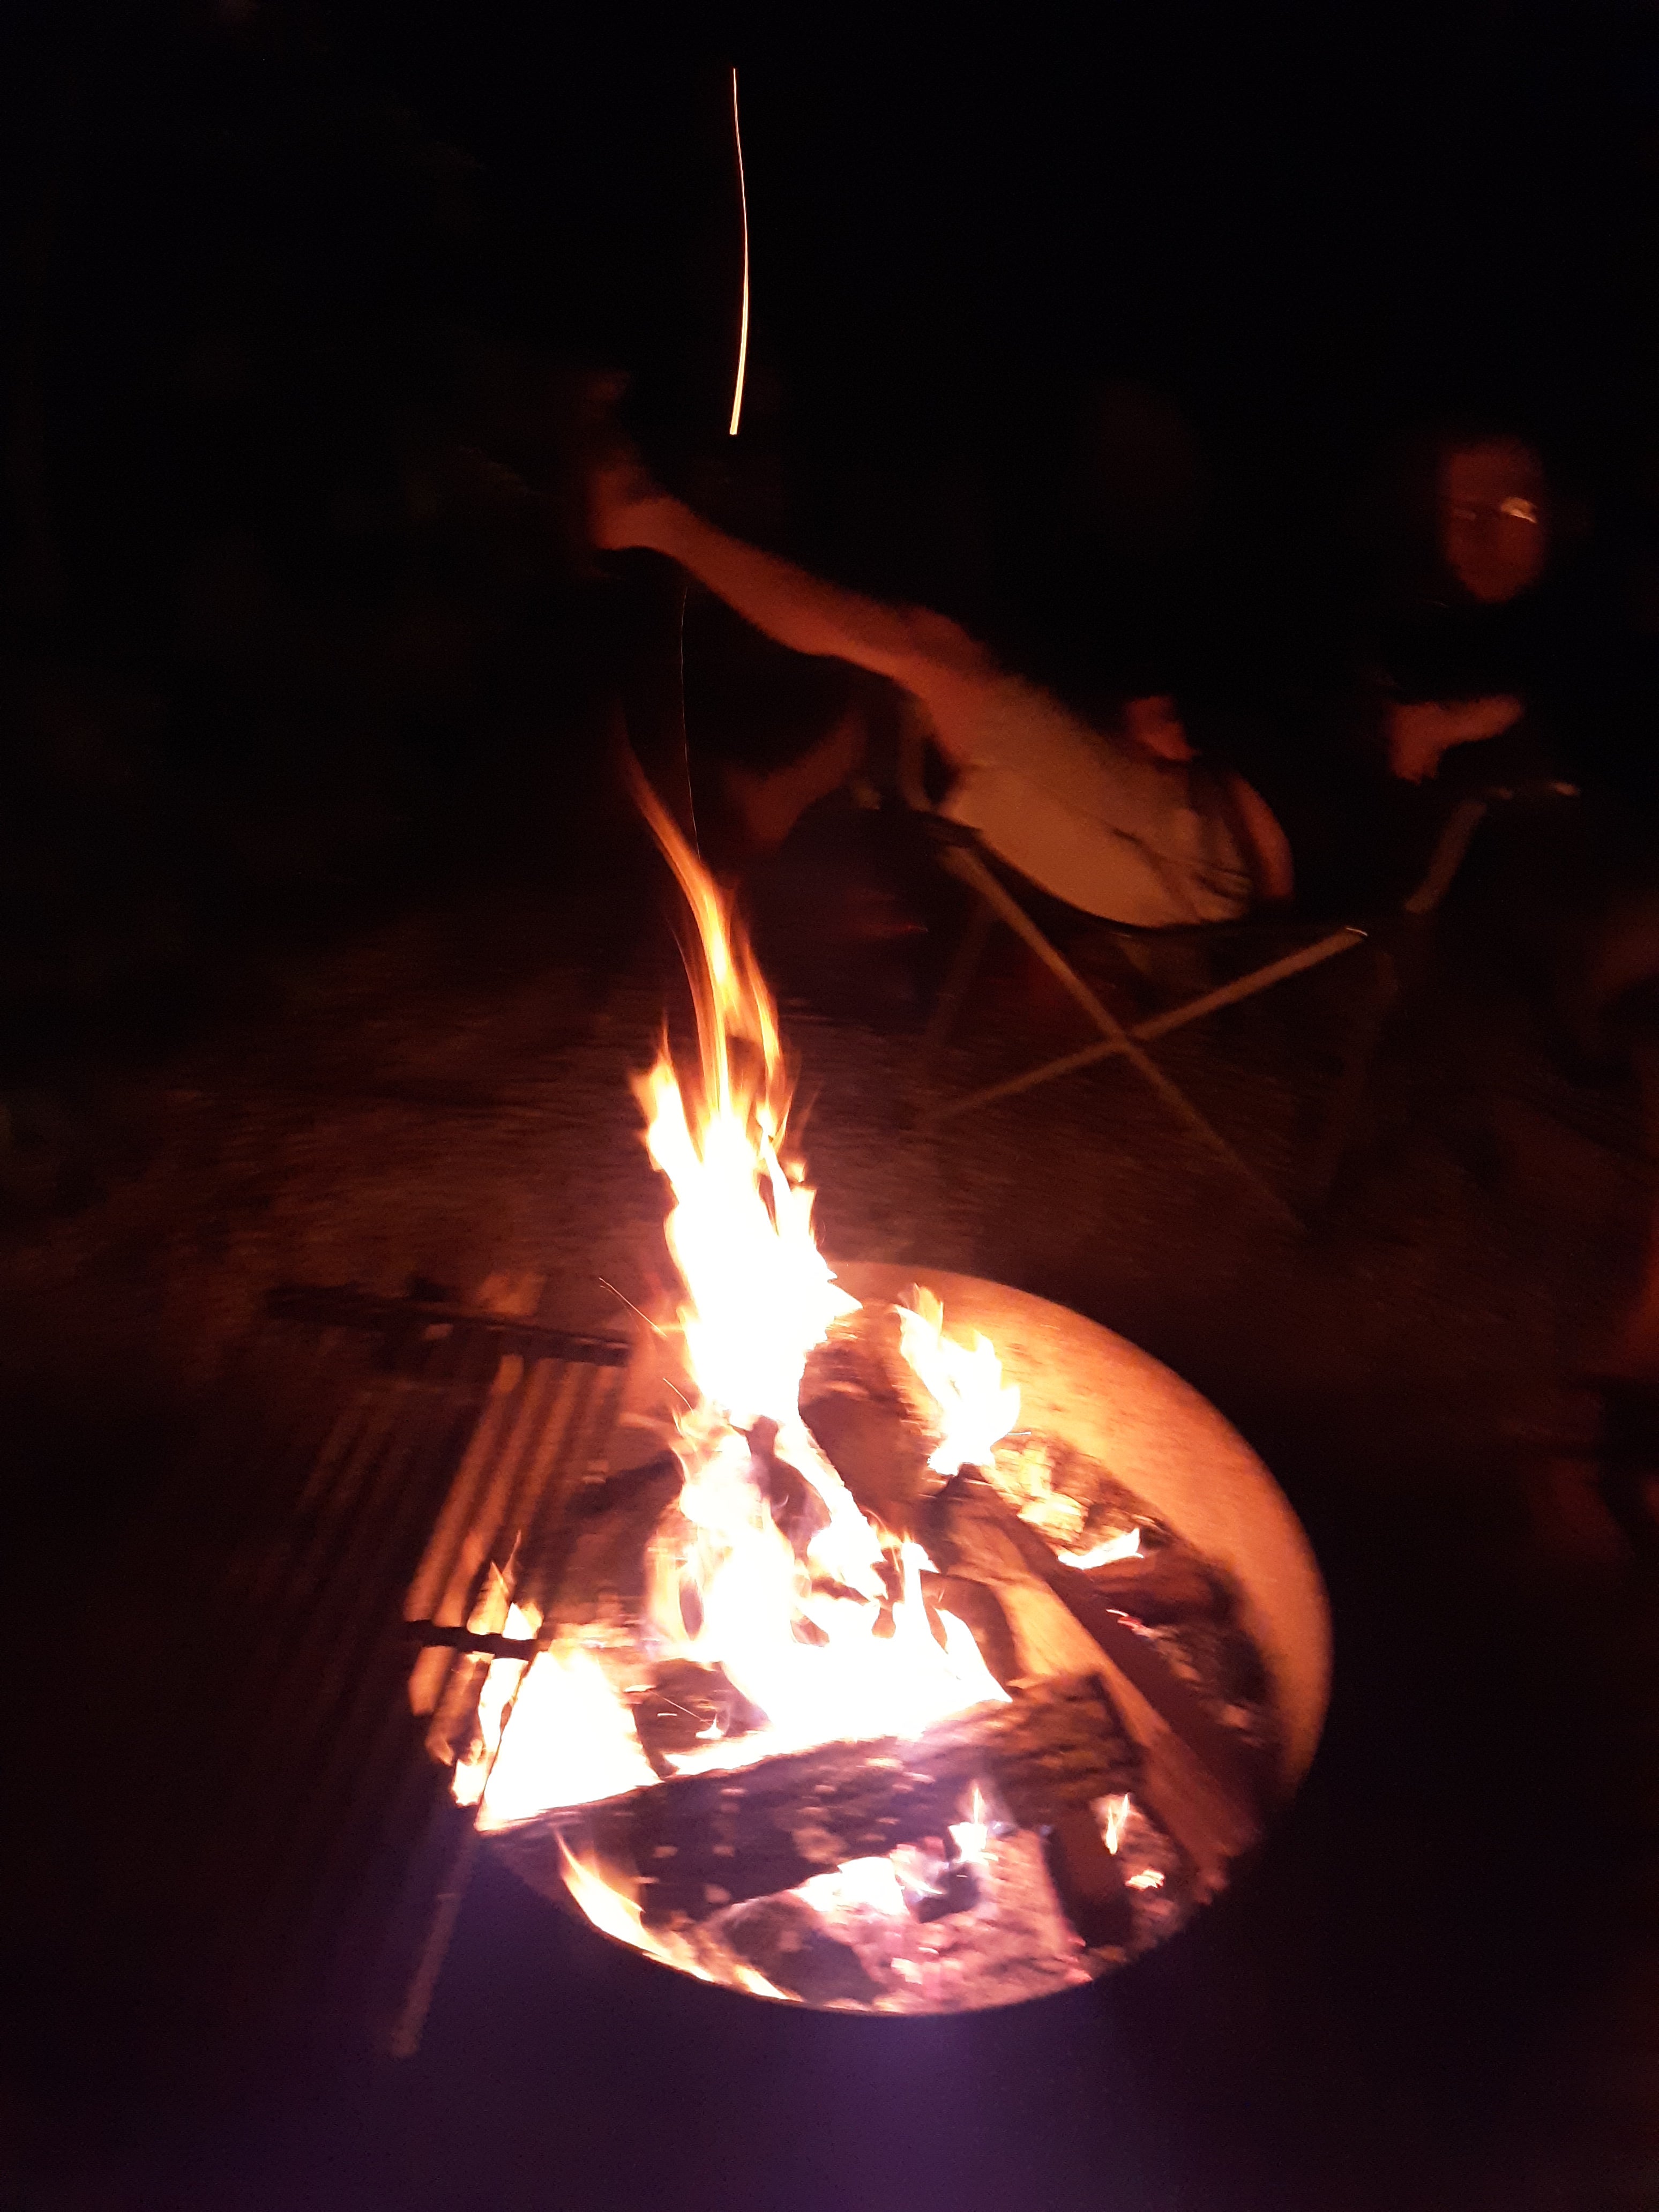 Ending the nights with Smores and a fire.